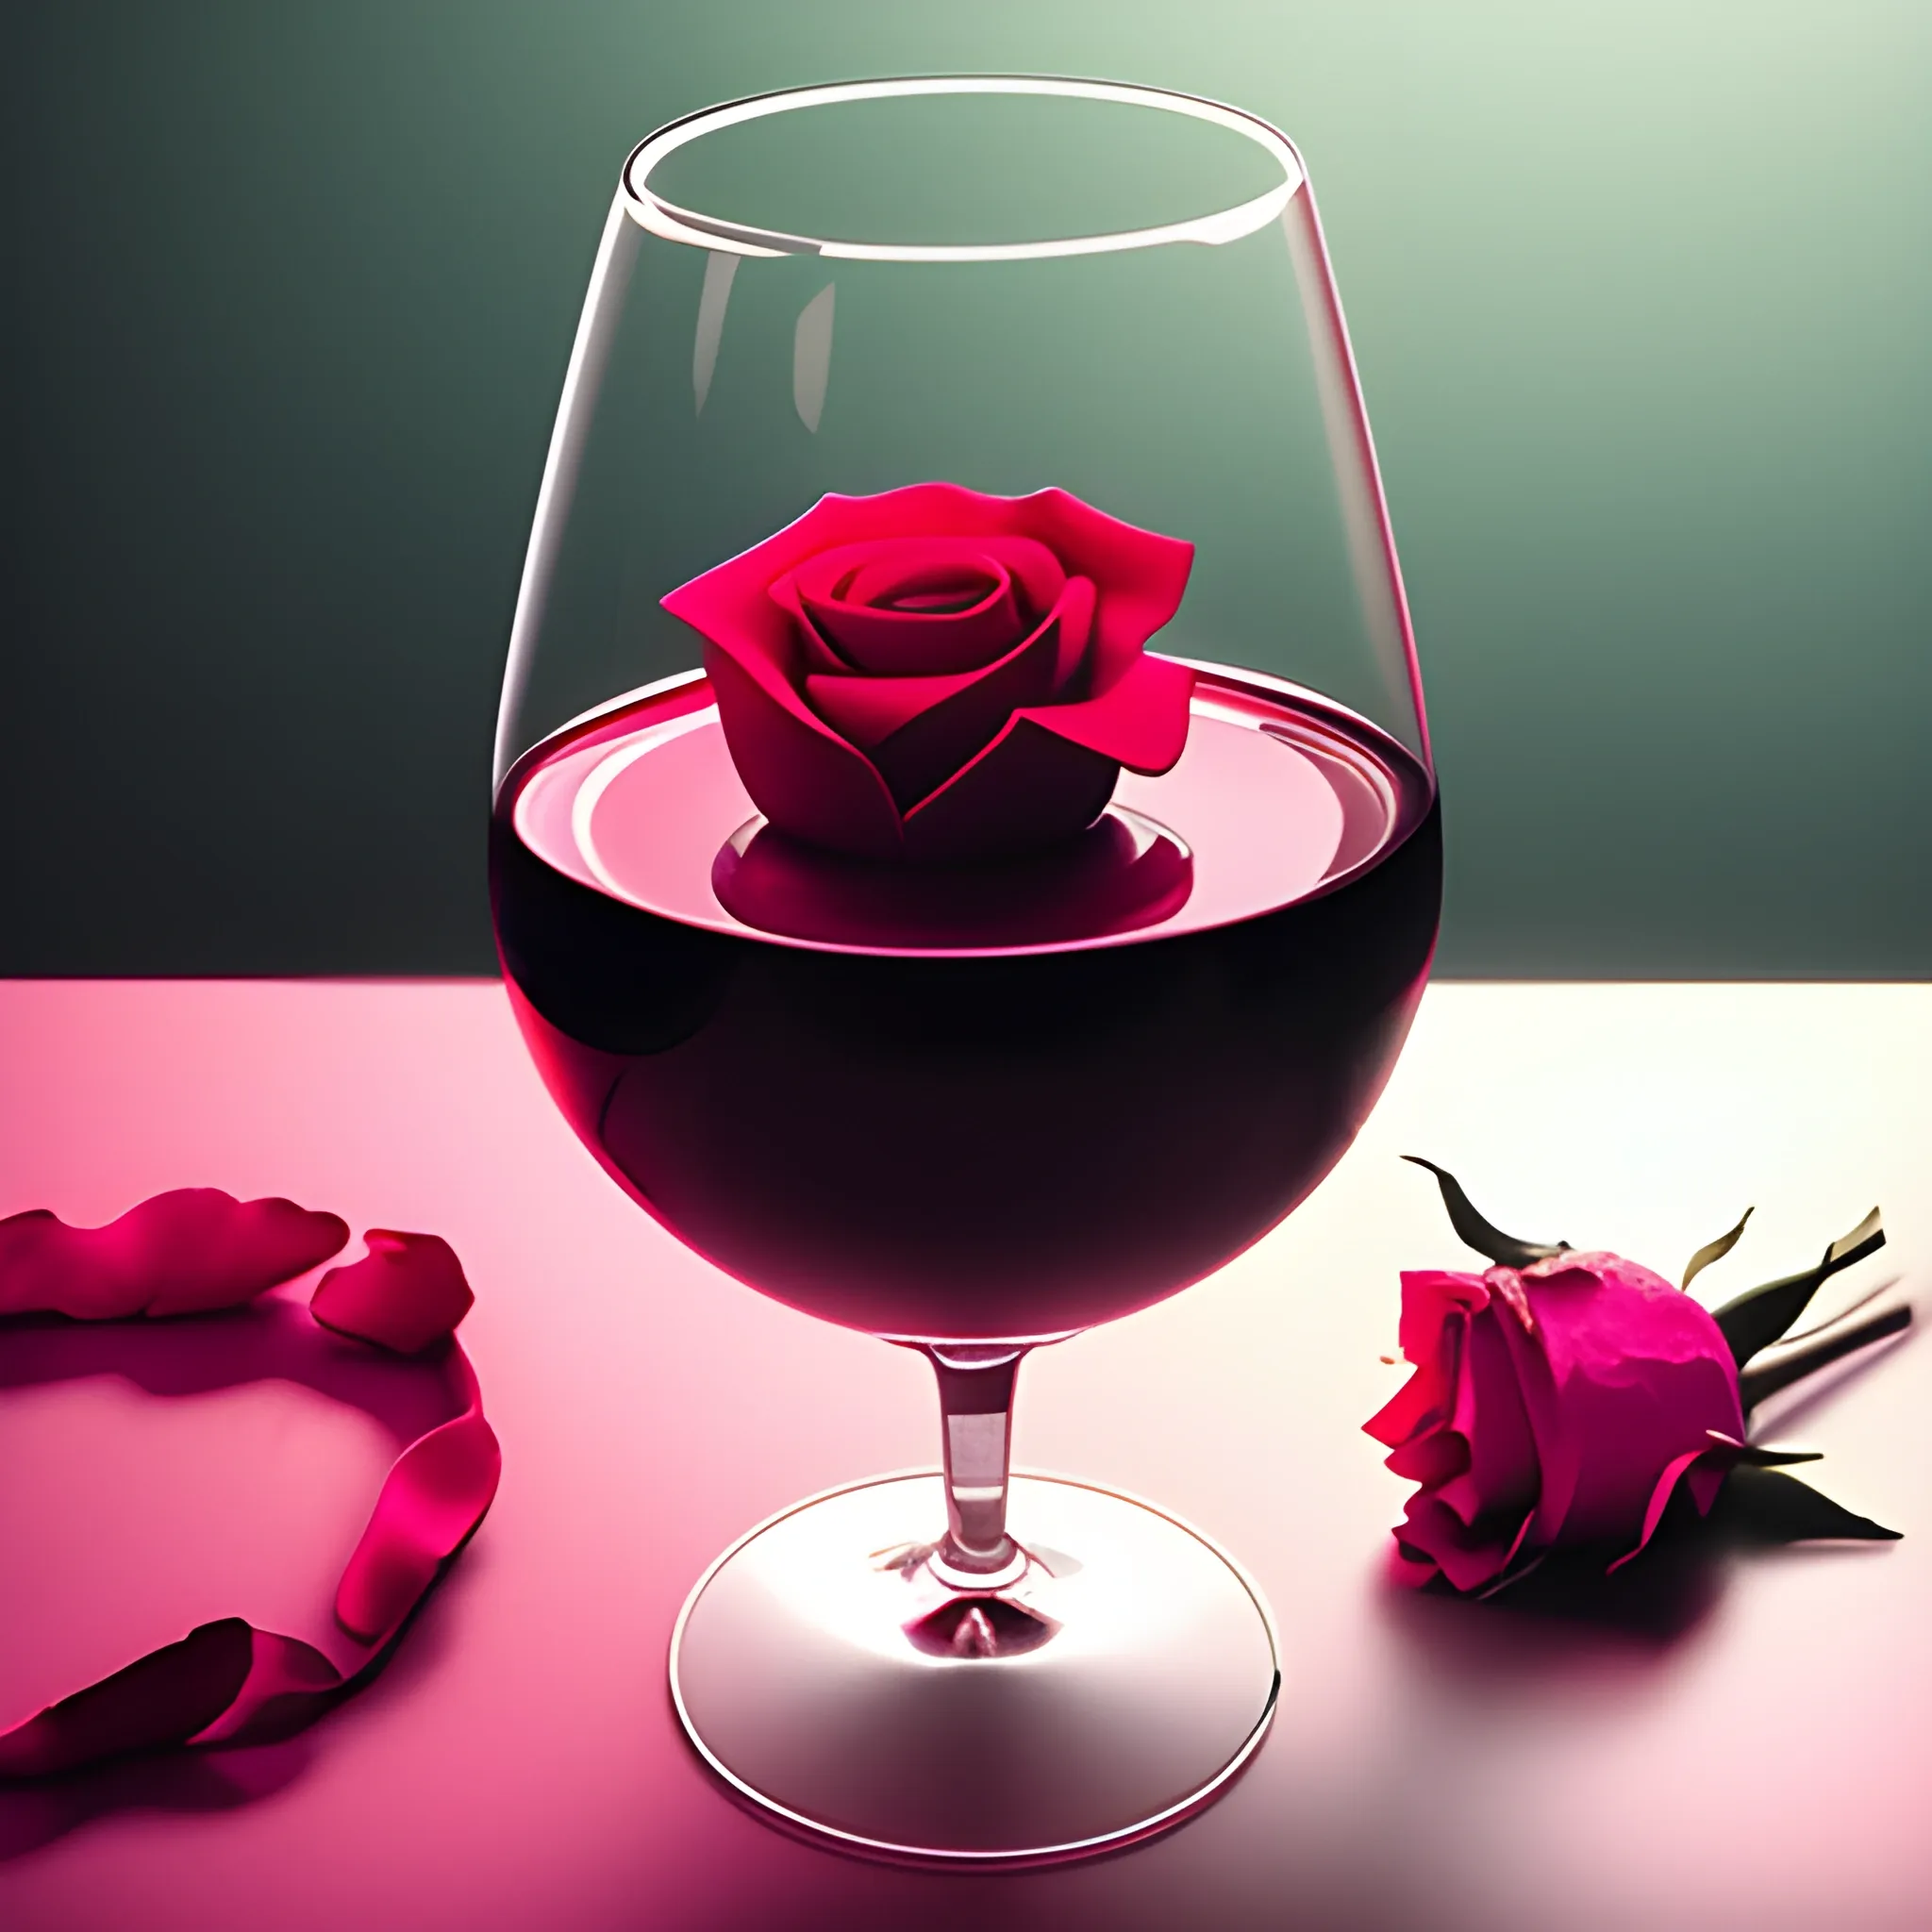 minimilist aesthetic art,wine poring in the glass,on the table ,with a red rose, and  a pink gun
